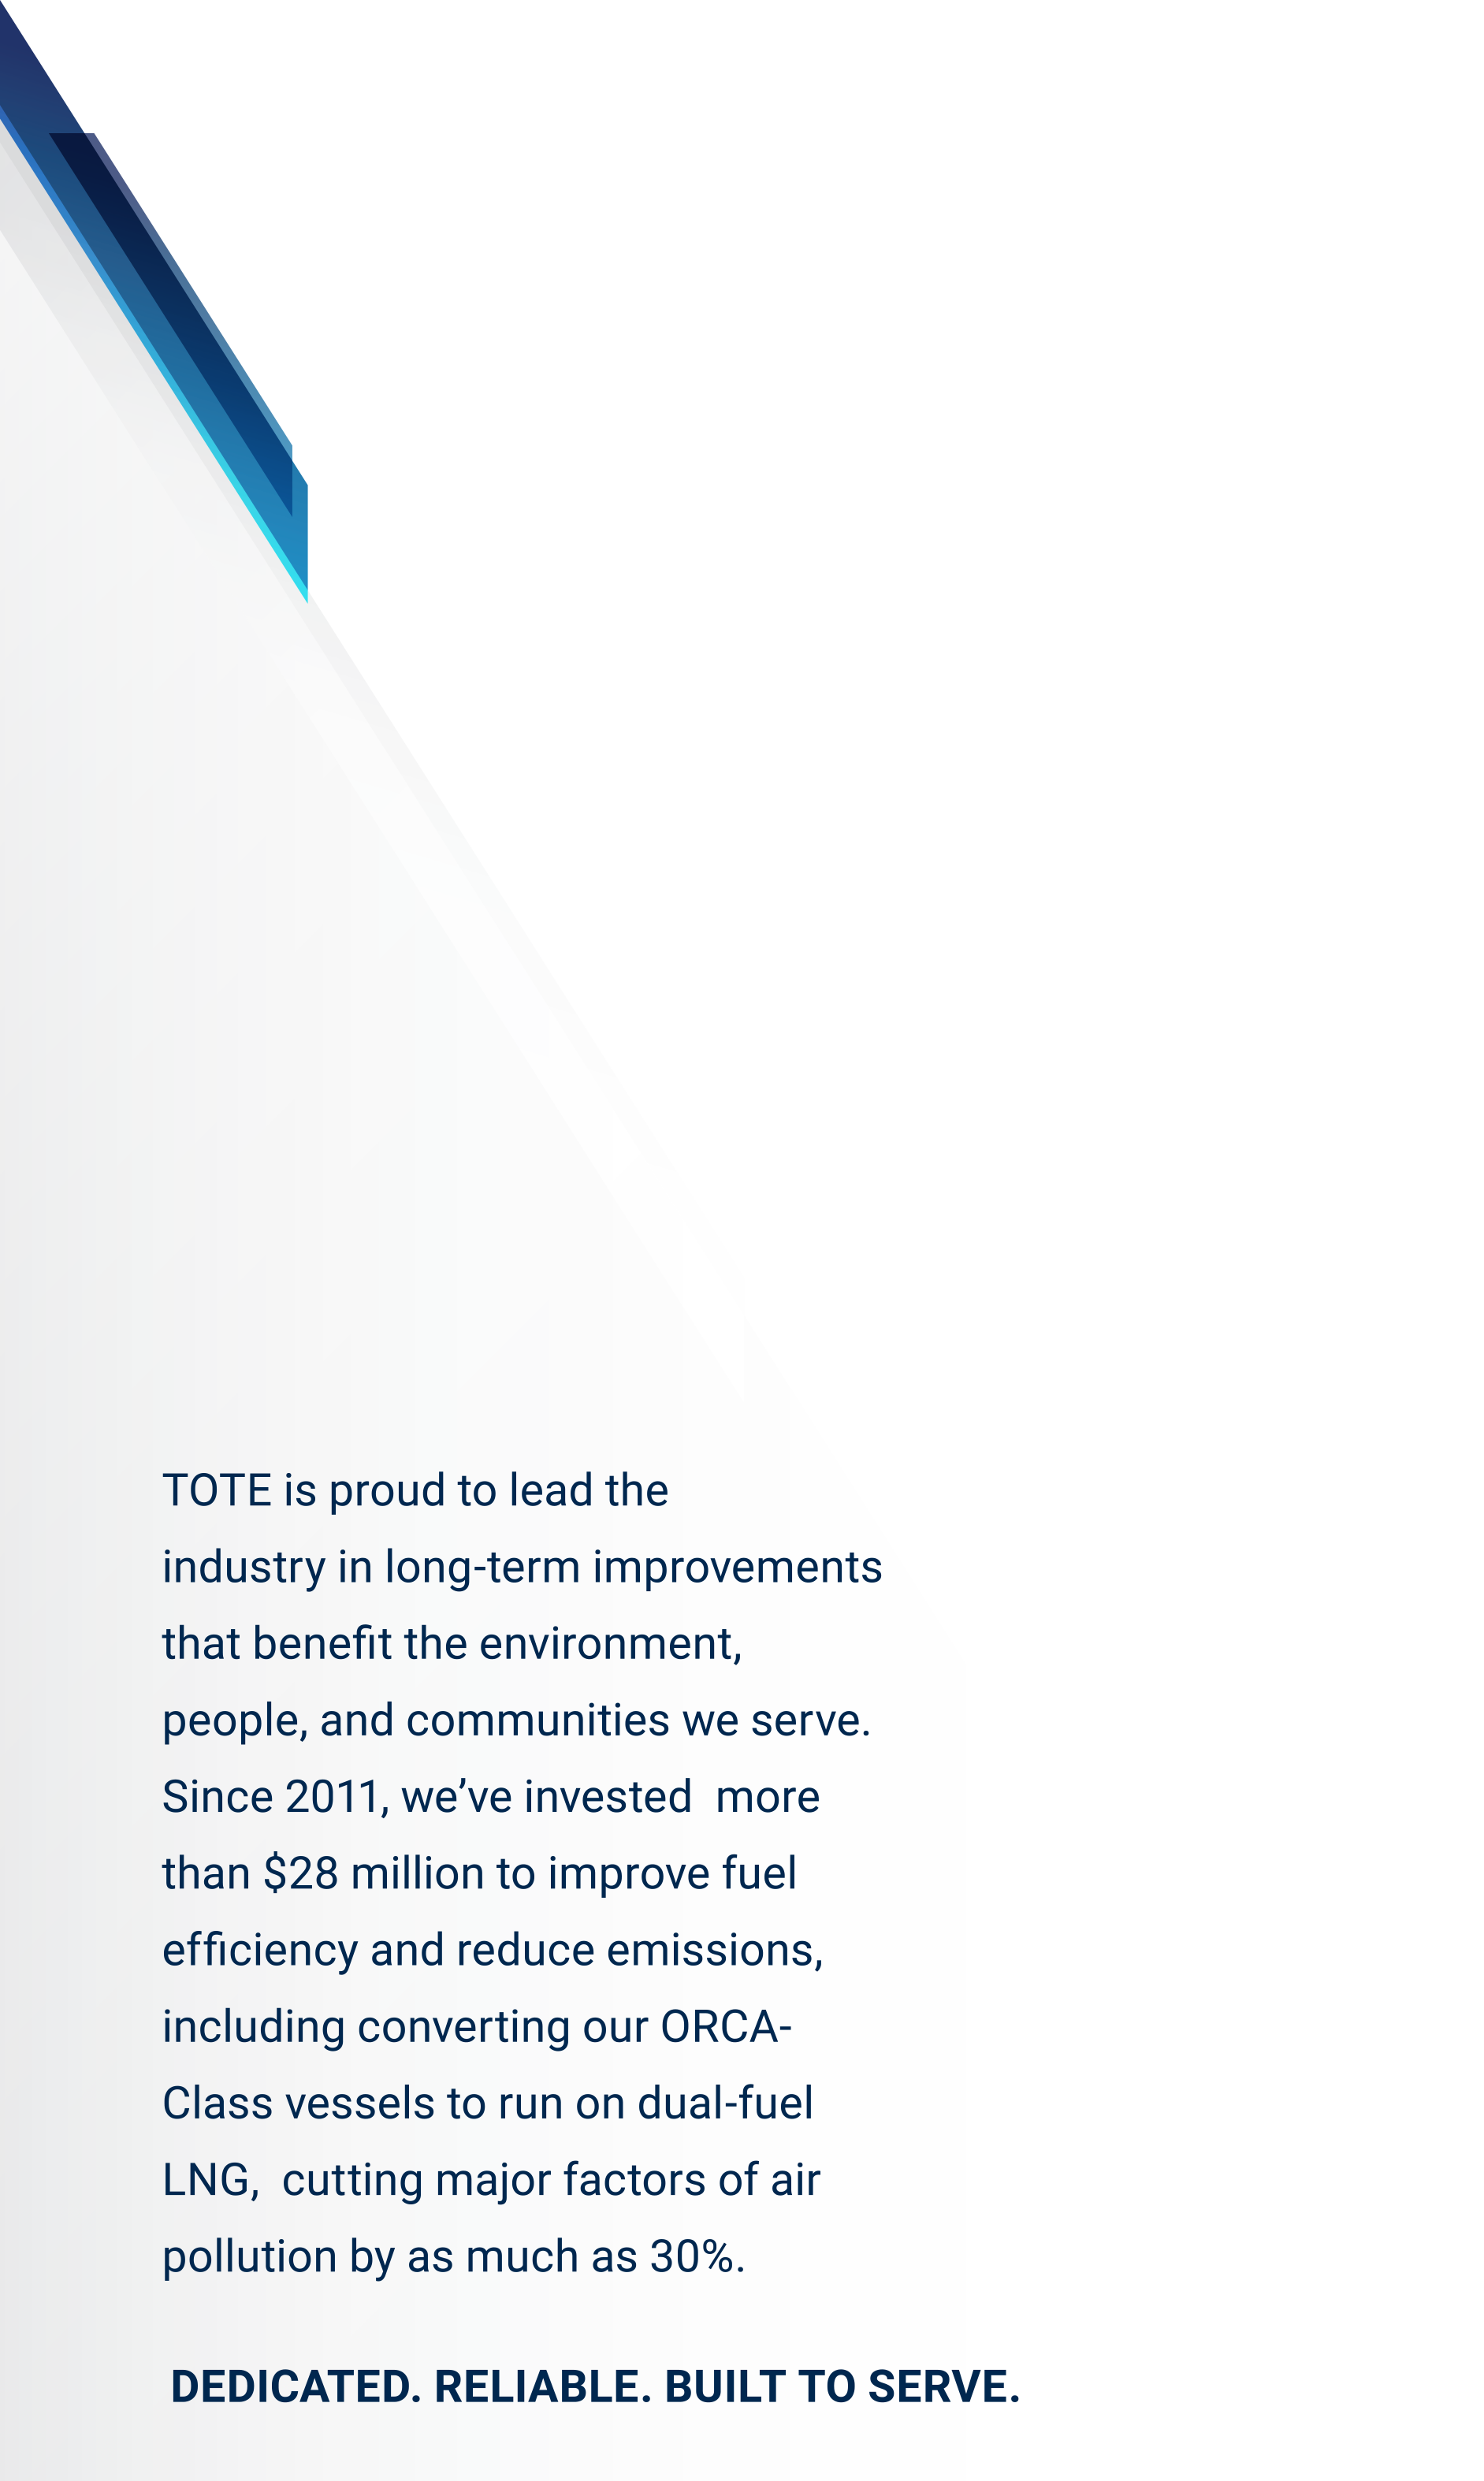 TOTE is proud to lead the<br />
industry in long-term improvements<br />
that benefit the environment,<br />
people, and communities we serve. Since 2011, we’ve invested  more than $28 million to improve fuel efficiency and reduce emissions,  including converting our ORCA-Class vessels to run on dual-fuel LNG,  cutting major factors of air pollution by as much as 30%